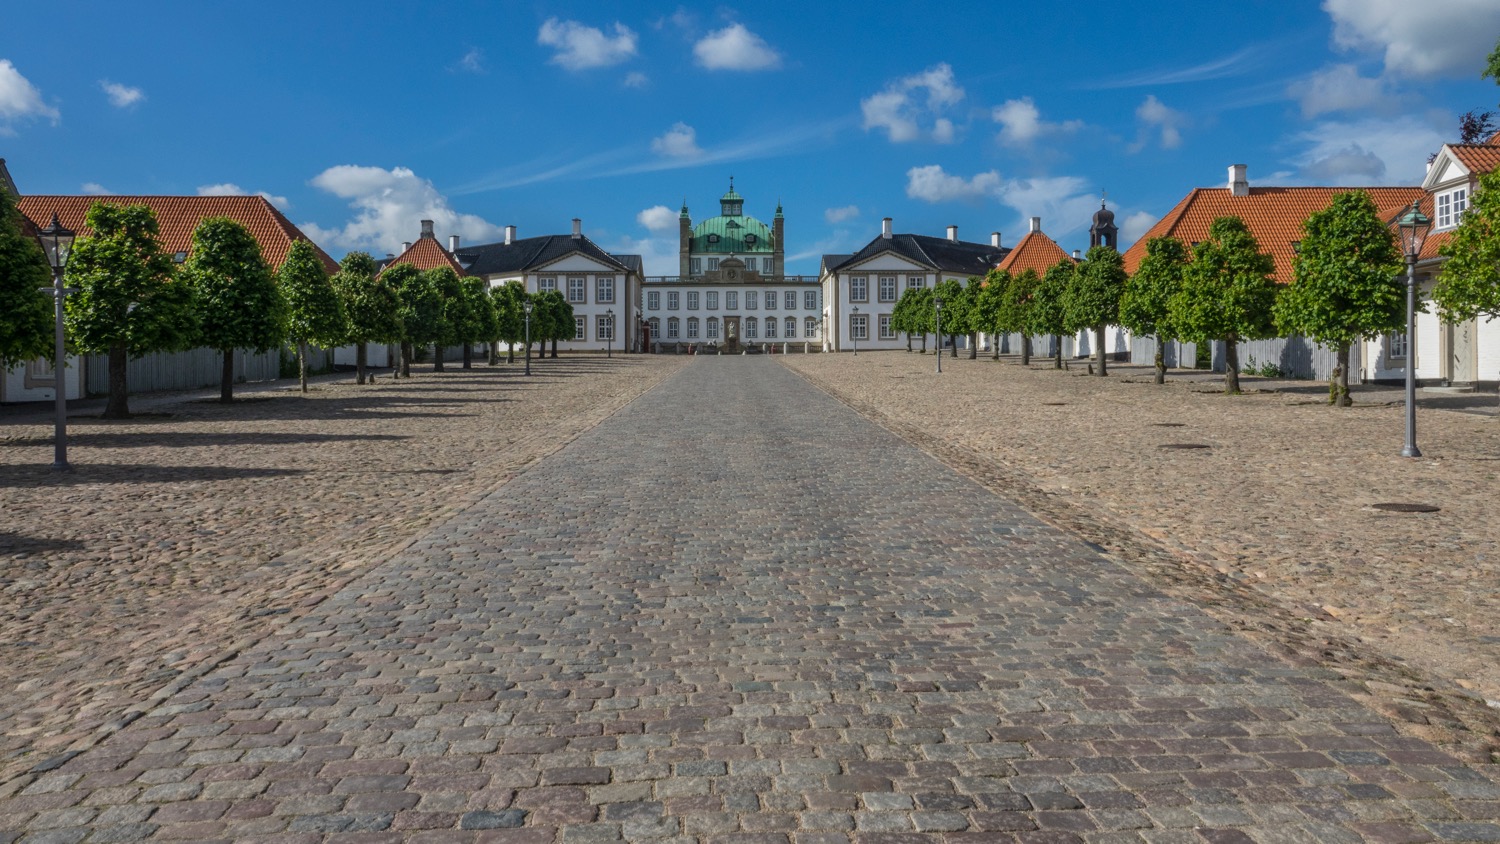  The long driveway up to Fredensborg Palace. The gates were open as the Royal Family was away. 